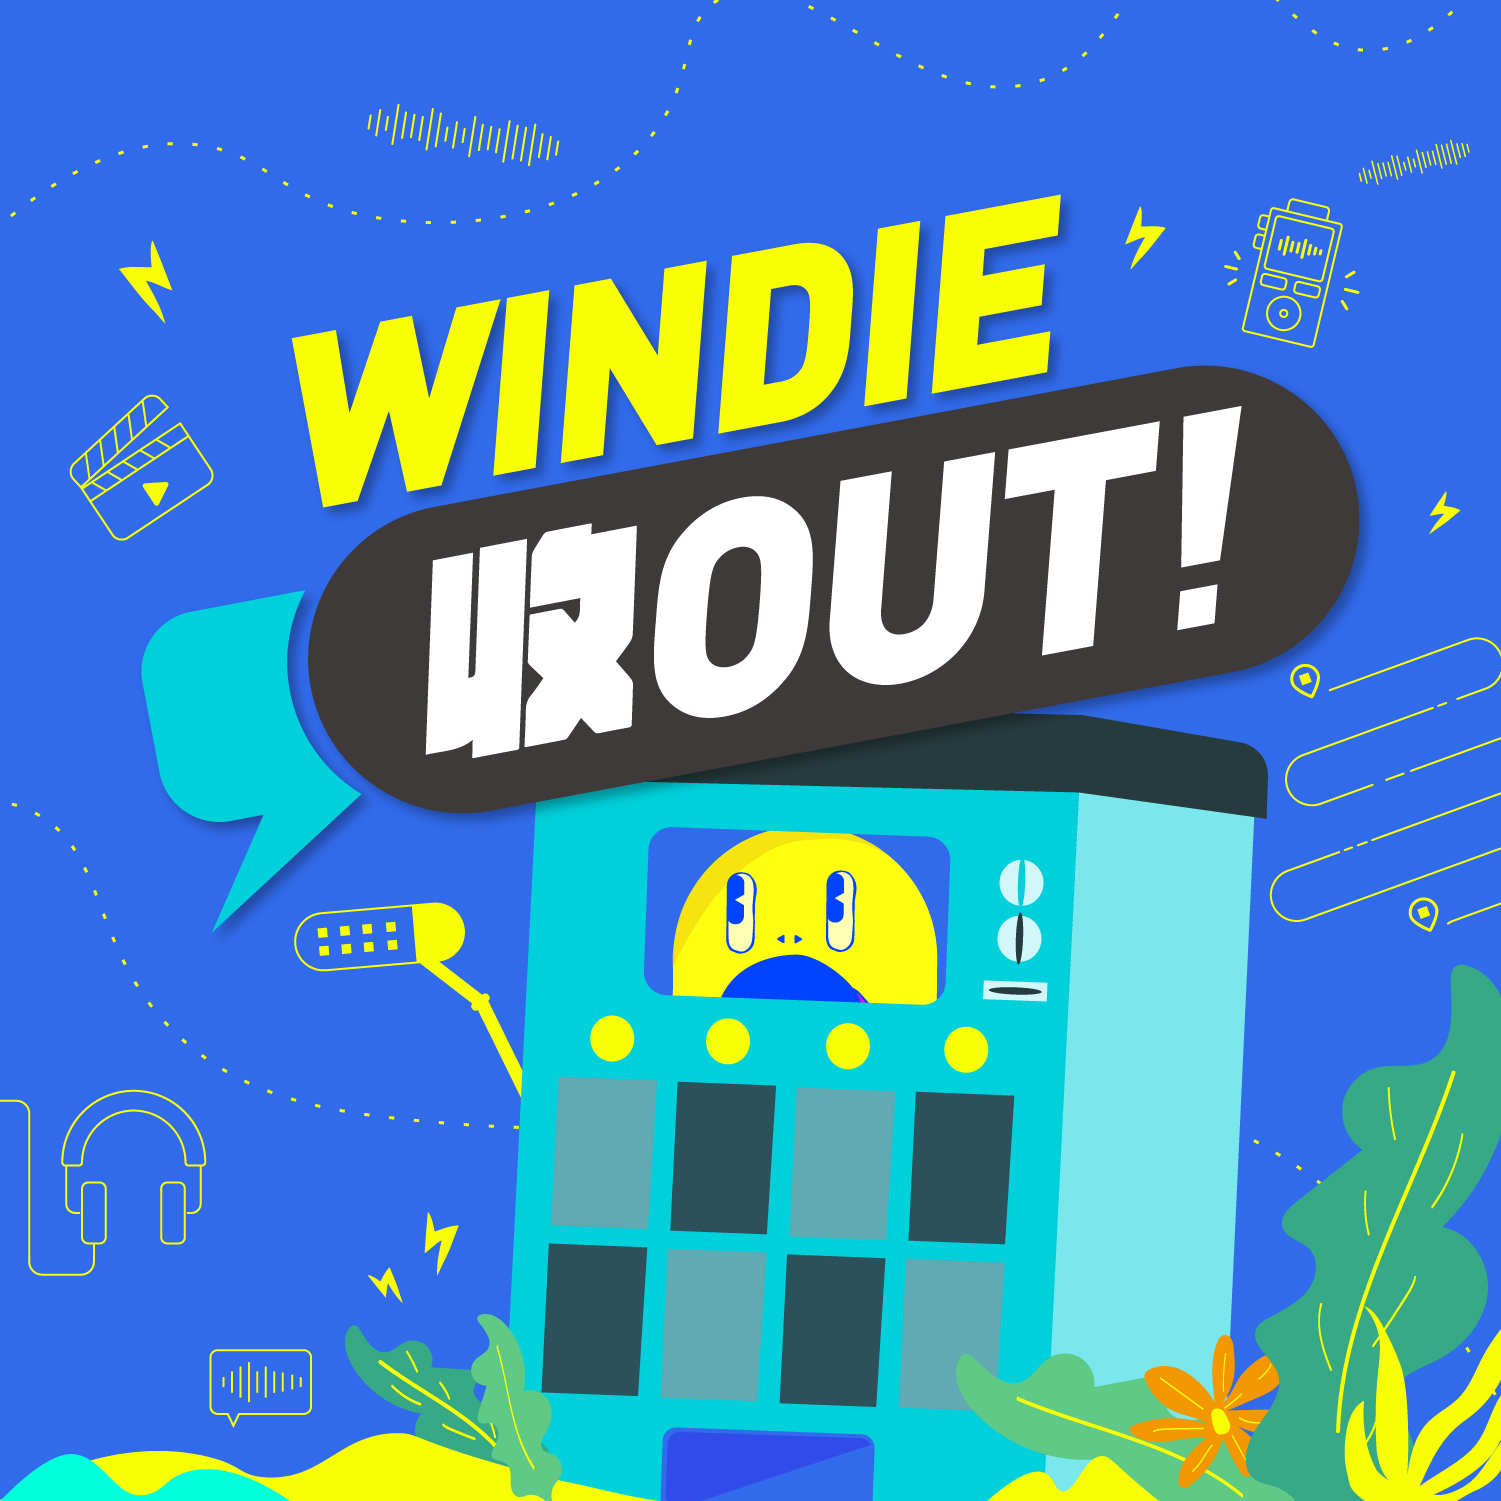 WINDIE 收OUT！